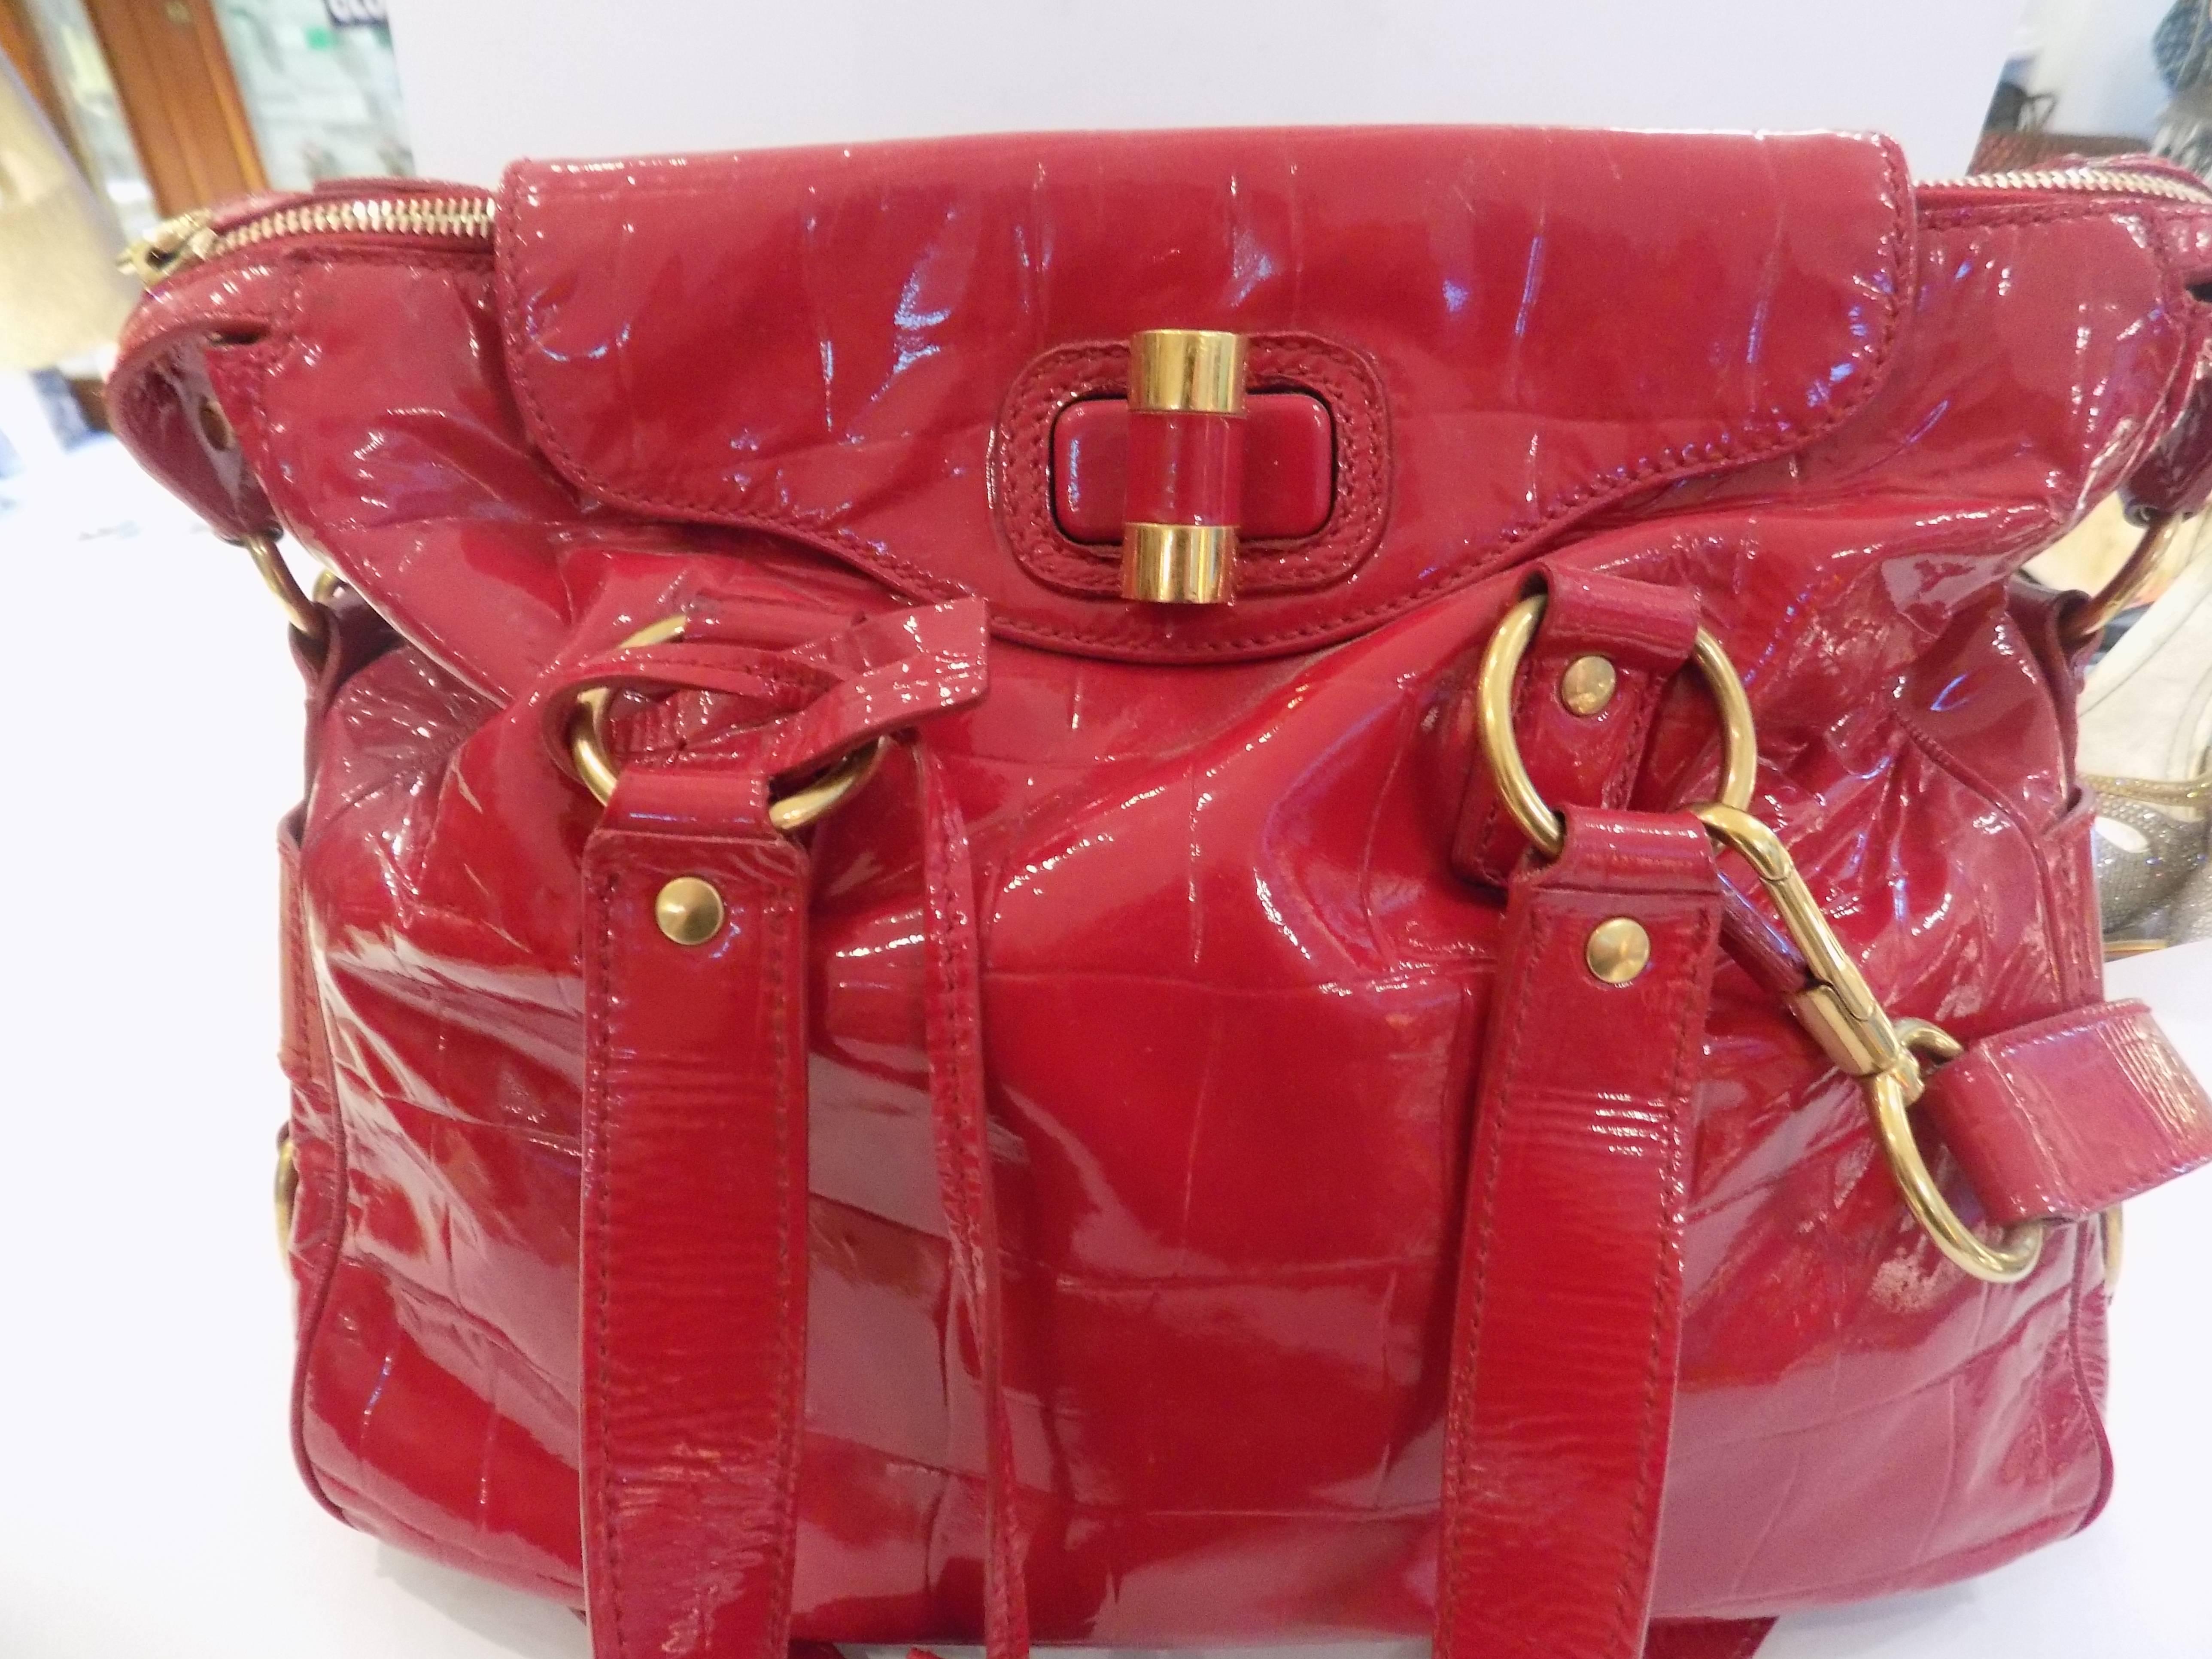 Yves Saint Laurent Red Varnish Leather Bag
The Yves Saint Laurent Slate  Leather Medium Rive Gauche Bag is as chic as they come. It features beautiful slate red varnish leather, goldtone hardware detailing, two top handles and a long strap. The top